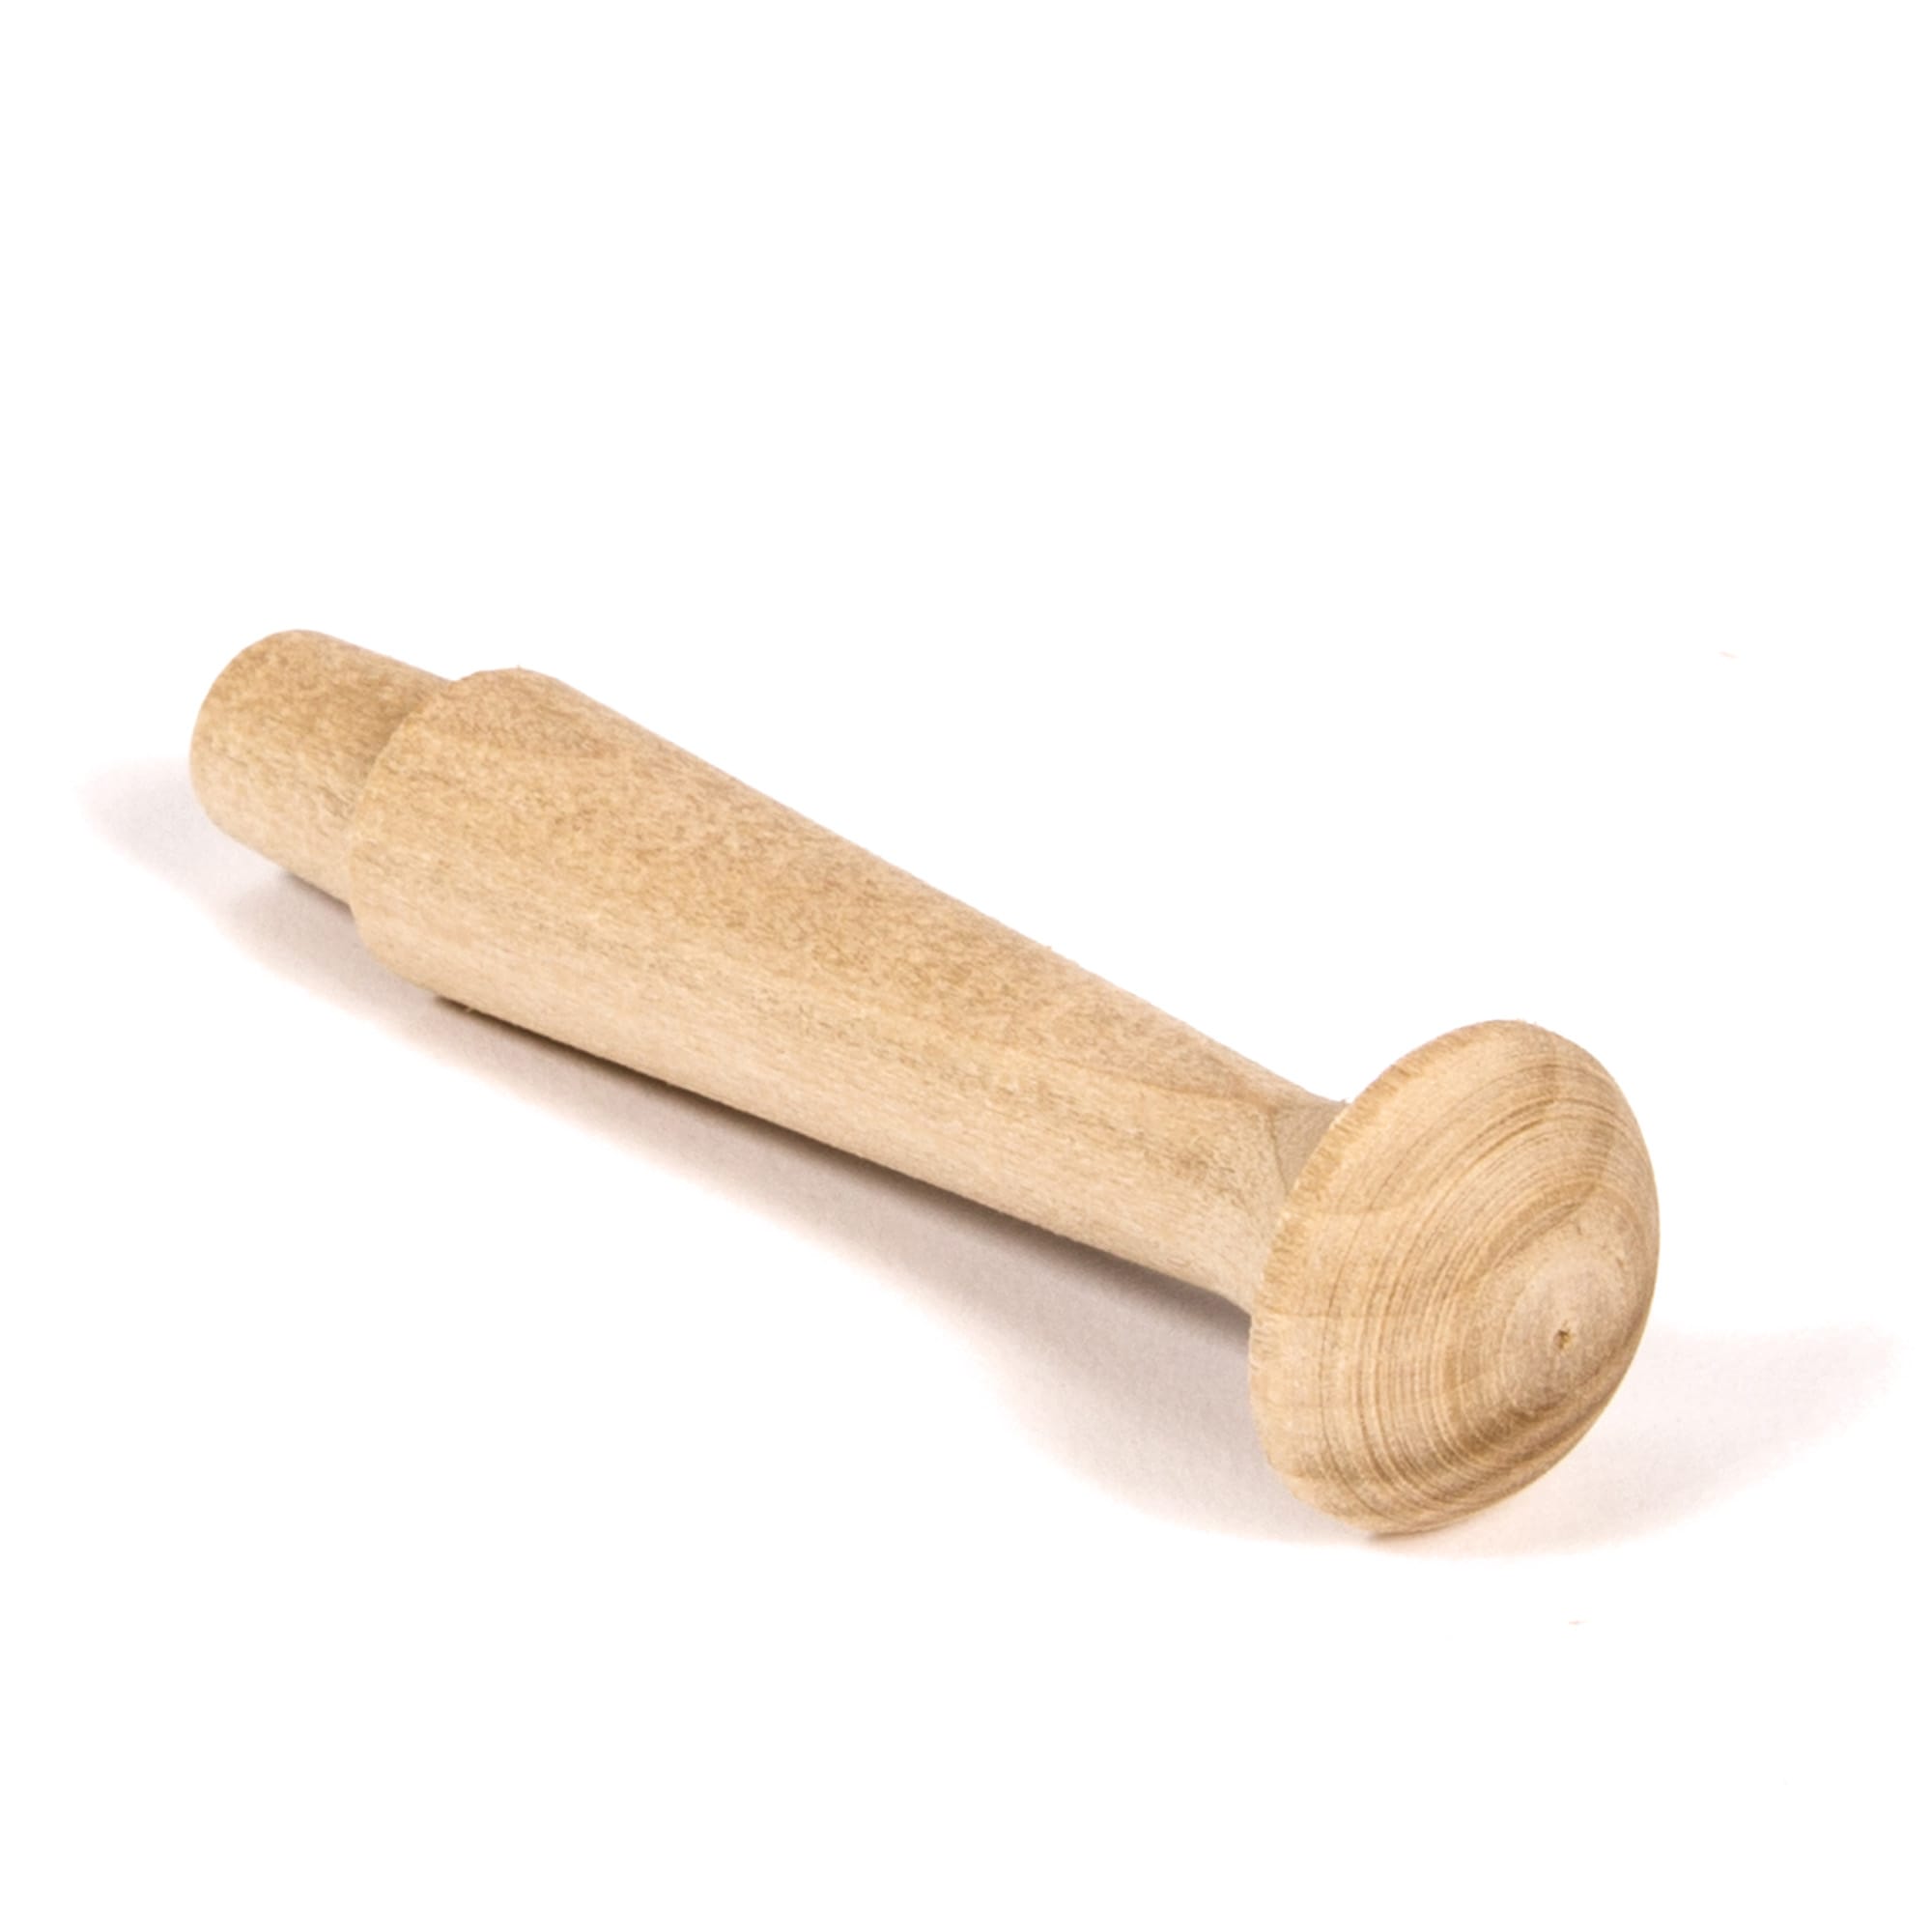 Wood Tapered Caning Pegs [#CANEPEG] - $0.3900 : Casey's Wood Products, We  at Casey's have it all - wood dowels, blocks, balls, toy wheels, cutouts,  shaker pegs and more. Anything for your